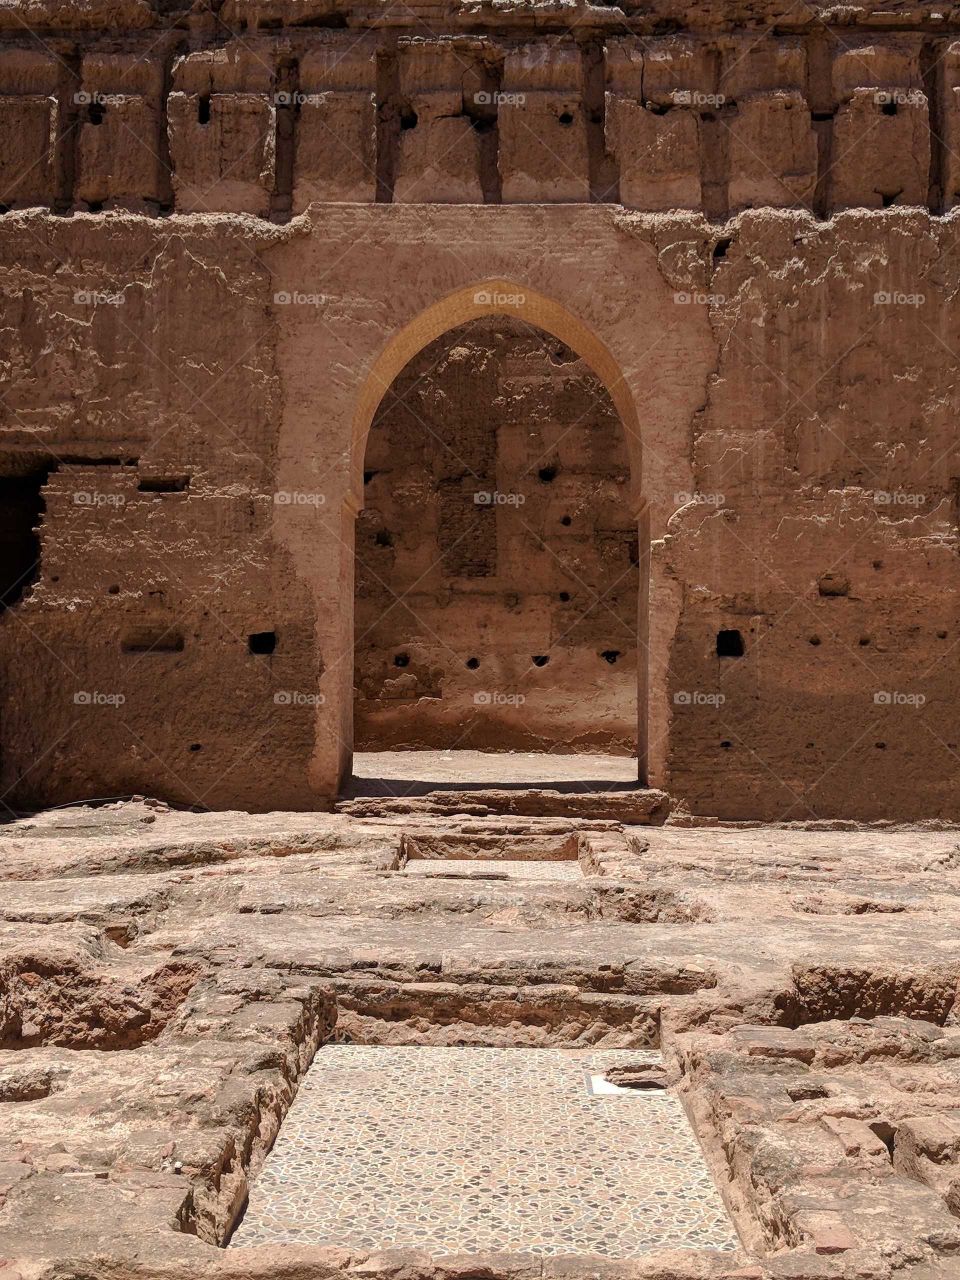 Exploring the Ancient Ruins of the Palais El Badi in Marrakech in Morocco - Brown Stone and Clay Arch in the Wall and Ceramic Tile Mosaic Floors